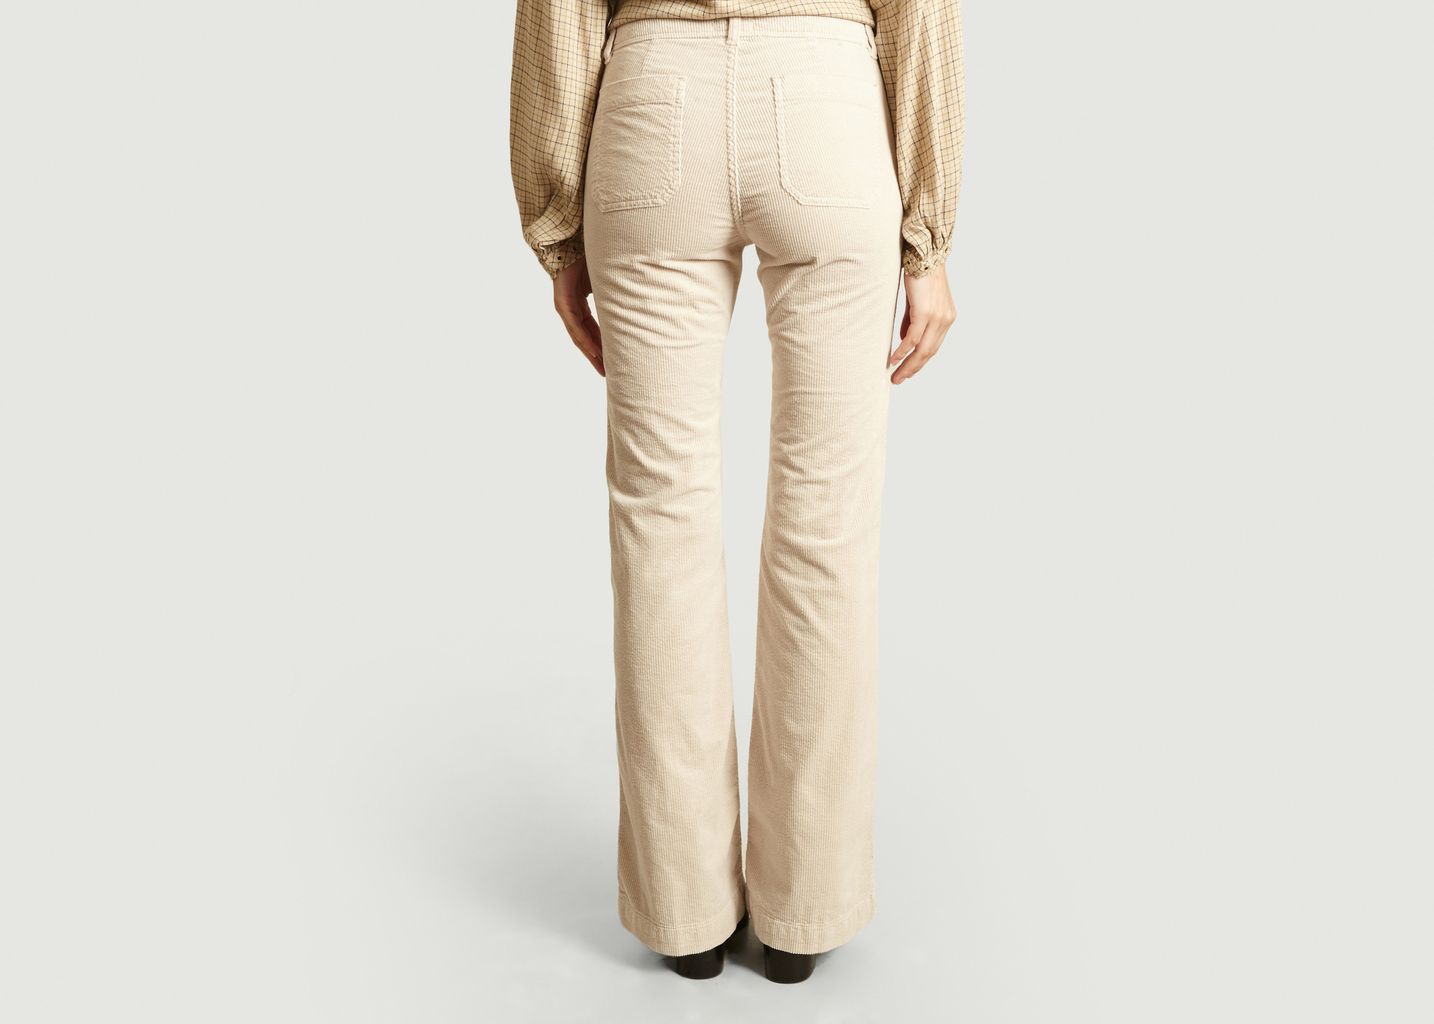 Fraise flared corduroy trousers - Swildens